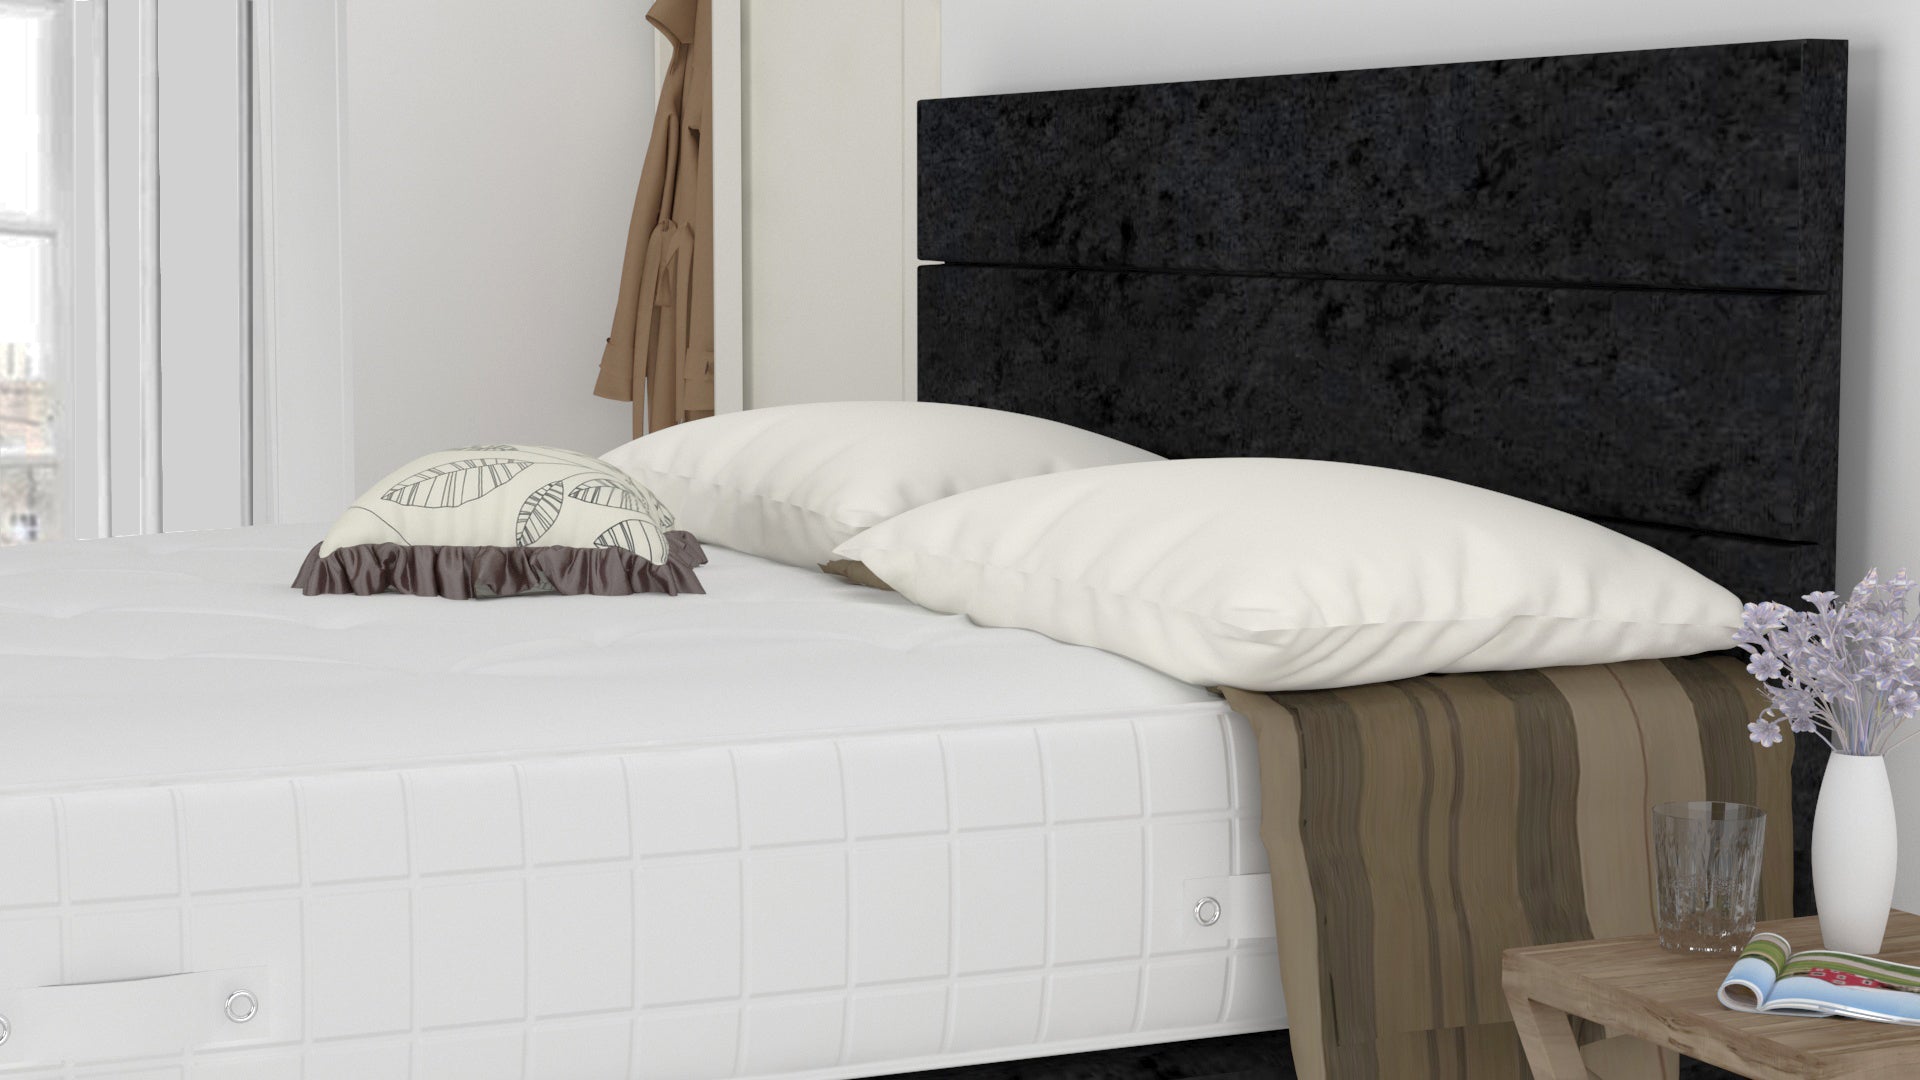 Black Crushed 3 Feet Divan Bed Set With 3 Panel Headboard (Included Feet) And Free Pillow Top Mattress